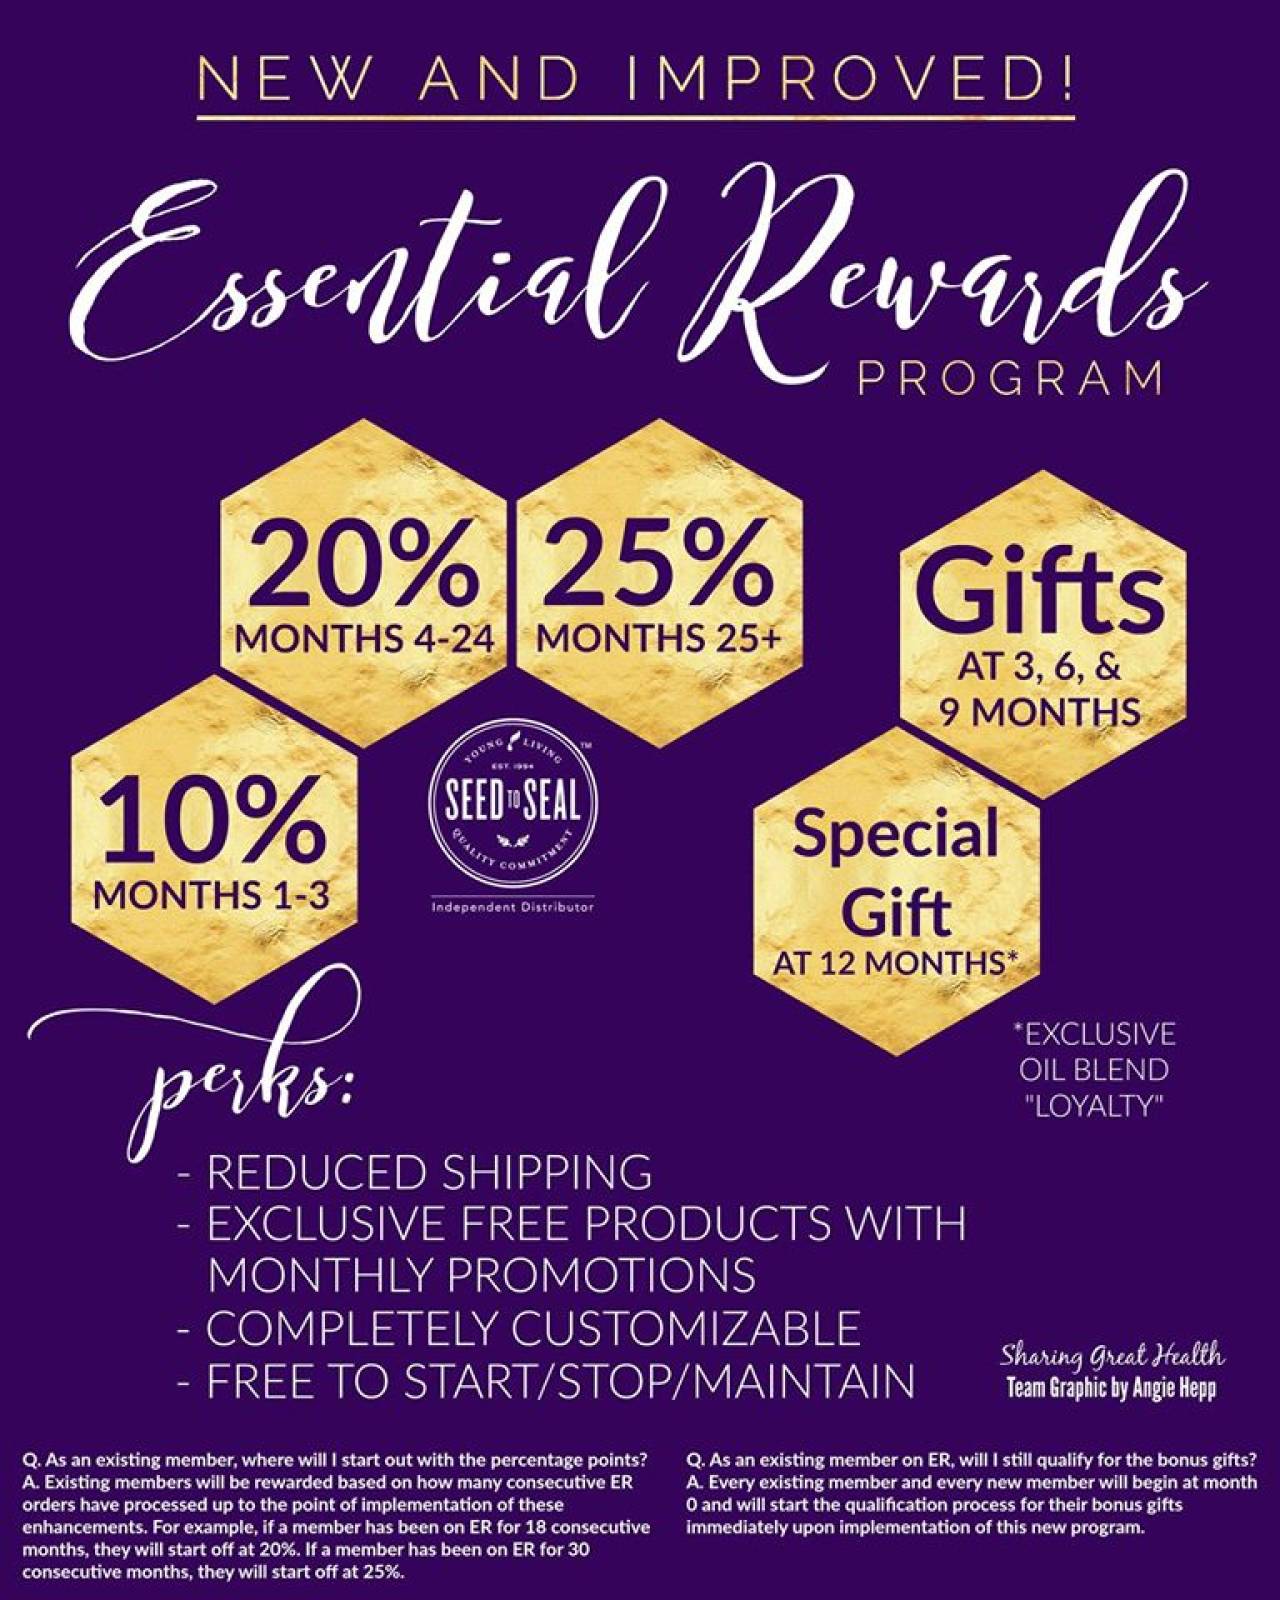 September is here and so is Fall and the New Essential Rewards